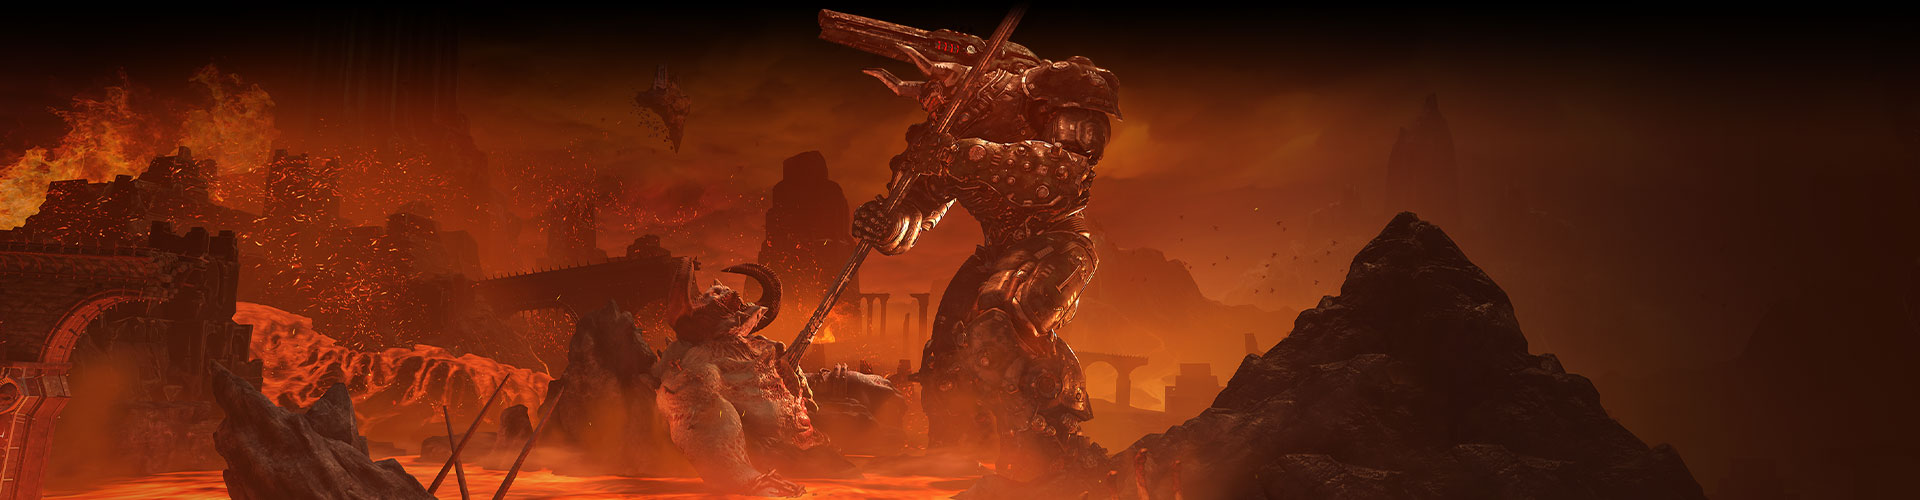 An underworld of monsters and spewing red lava in DOOM Eternal.